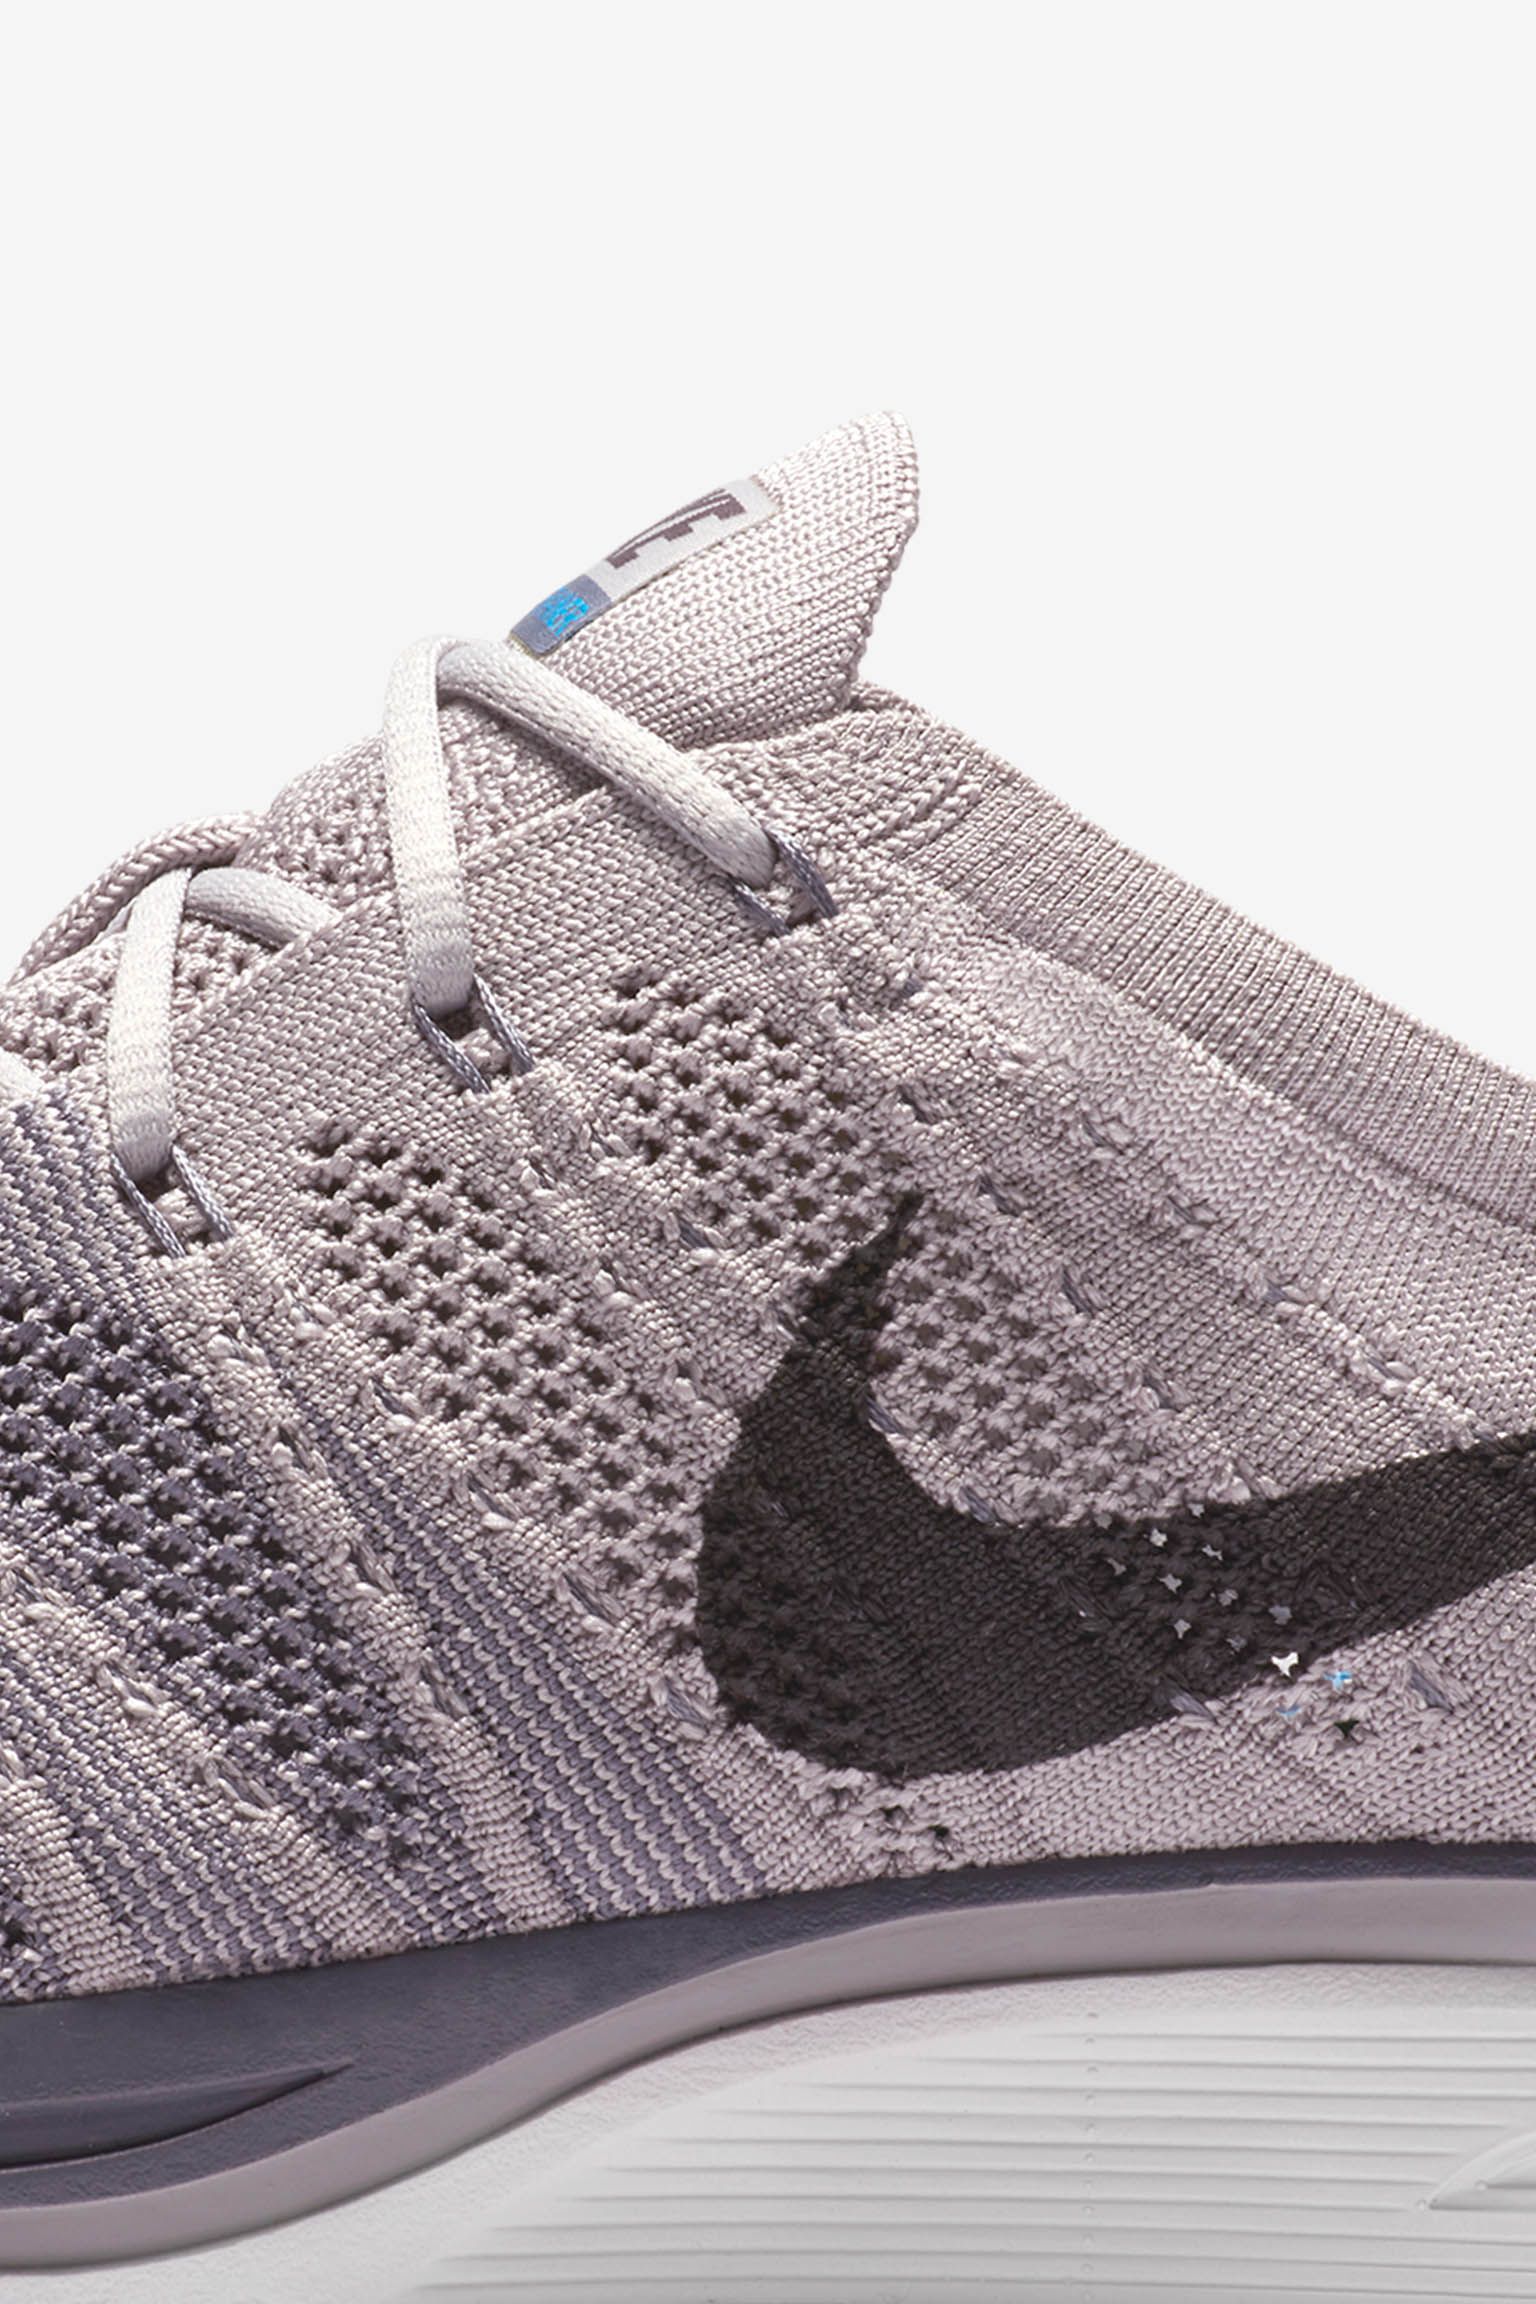 Nike Flyknit Trainer 'Atmosphere Grey & Thunder Grey' Release Date